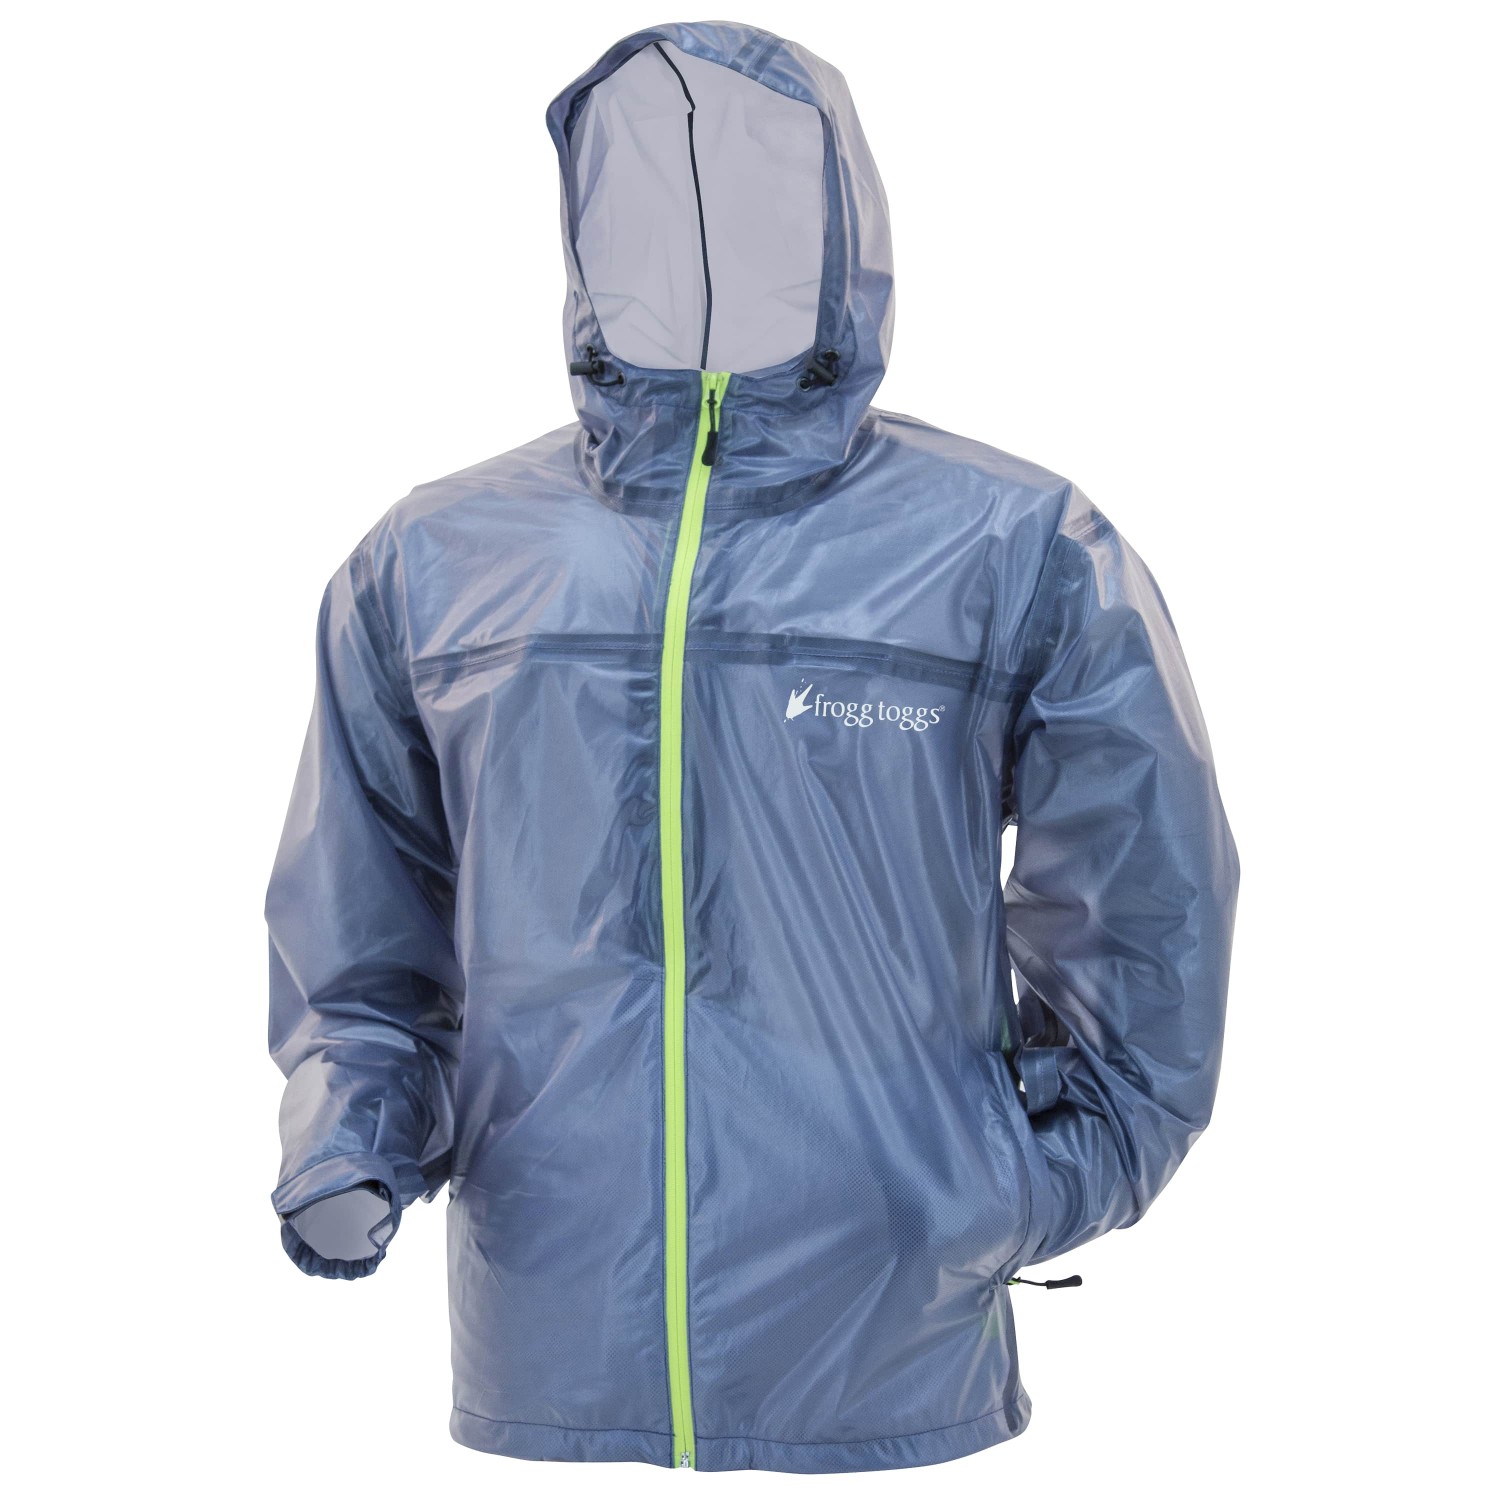 Frogg Toggs Men's Xtreme Lite Jacket - image 1 of 3